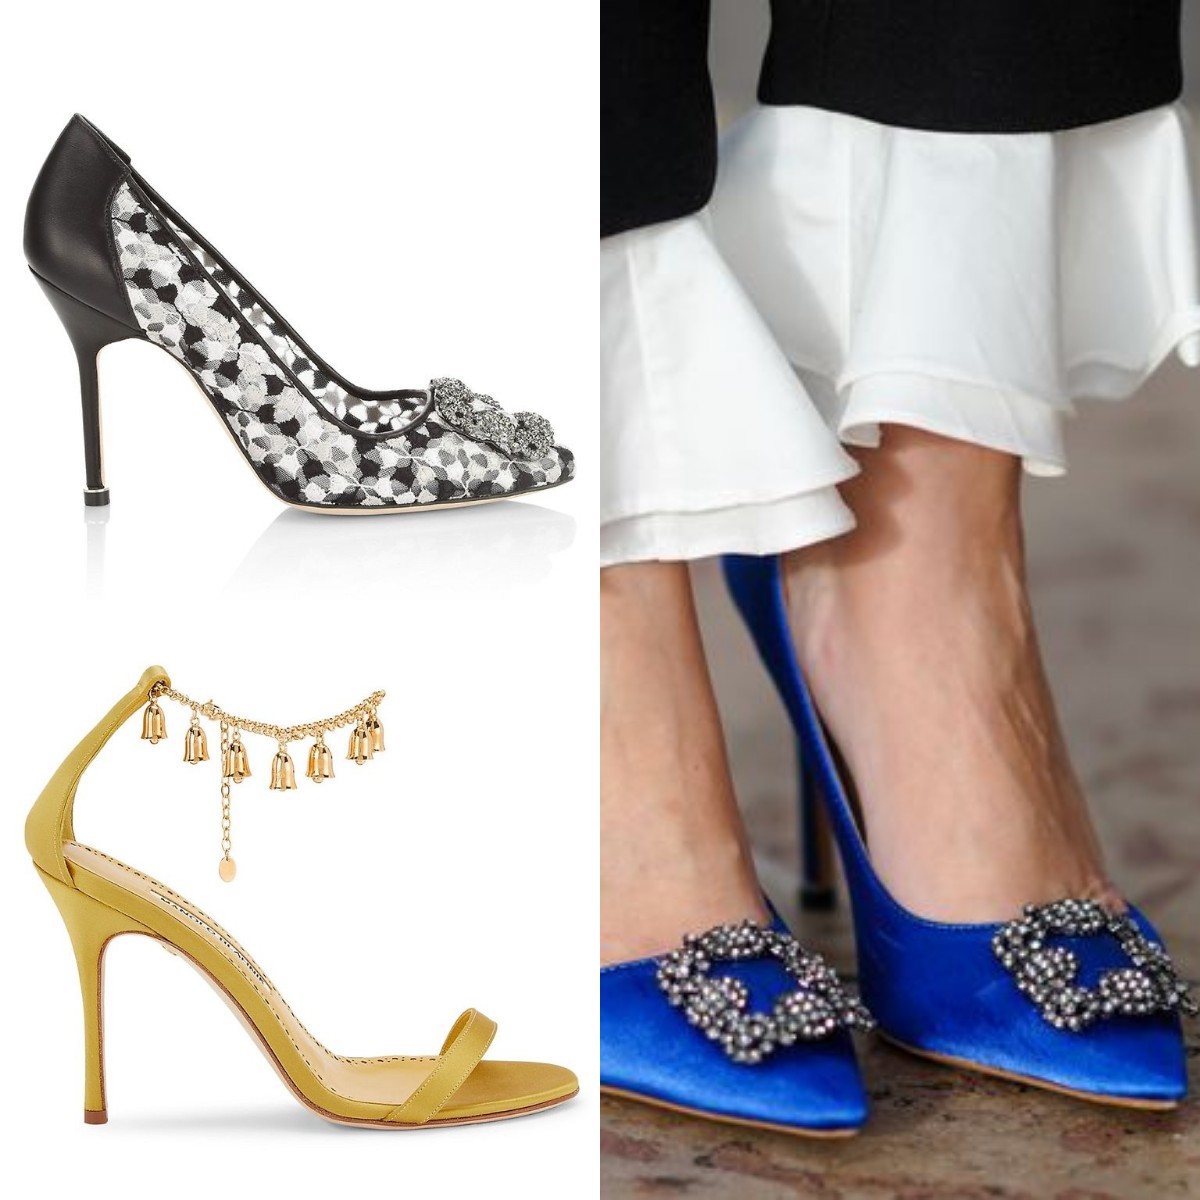 Tons of Manolo Blahnik Sandals, Heels, and Mules - Pretty 4